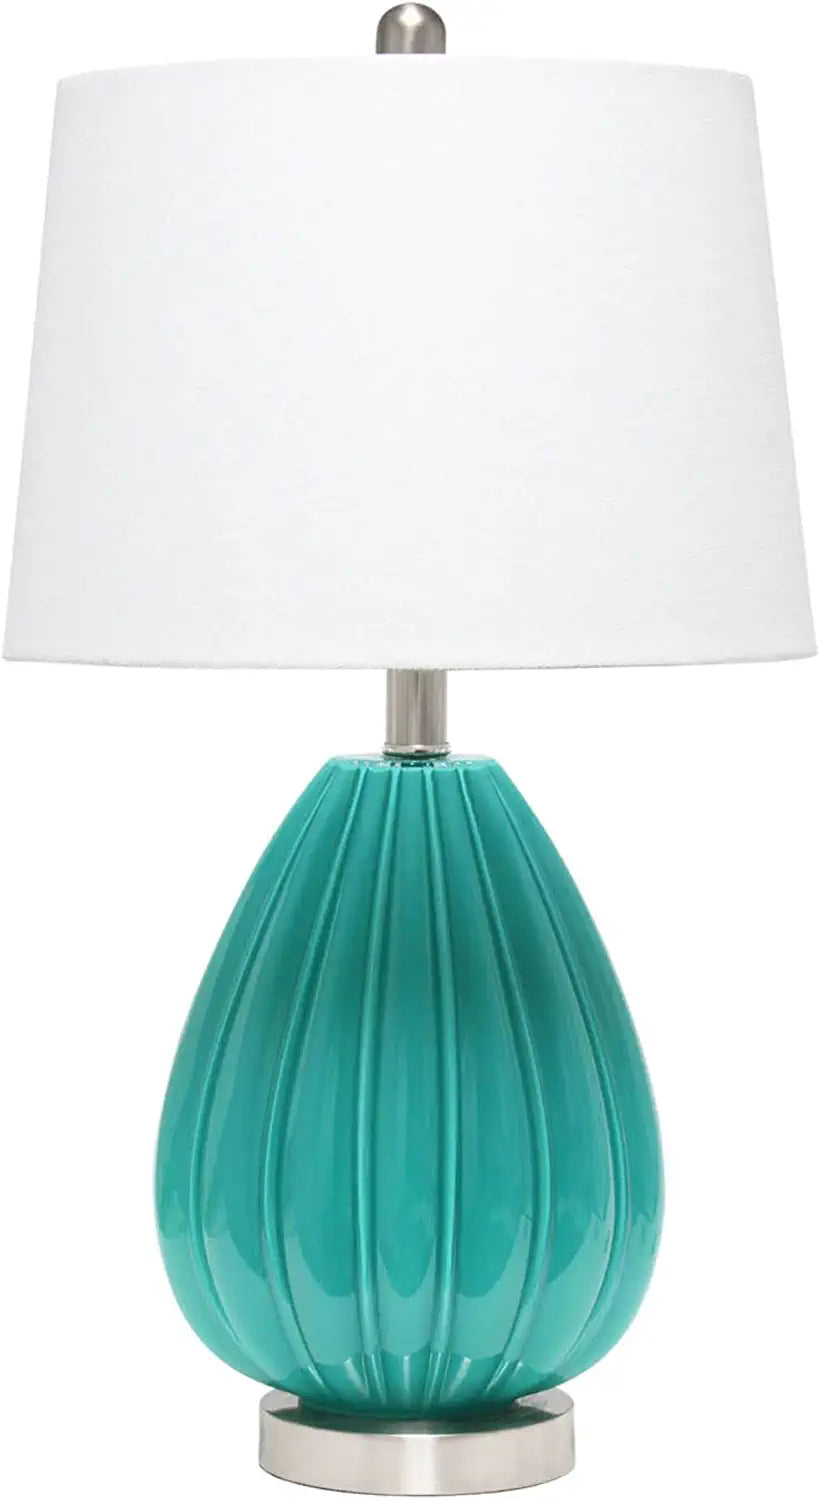 Lalia Home Contemporary Pleated Table Lamp with White Fabric Shade - Teal